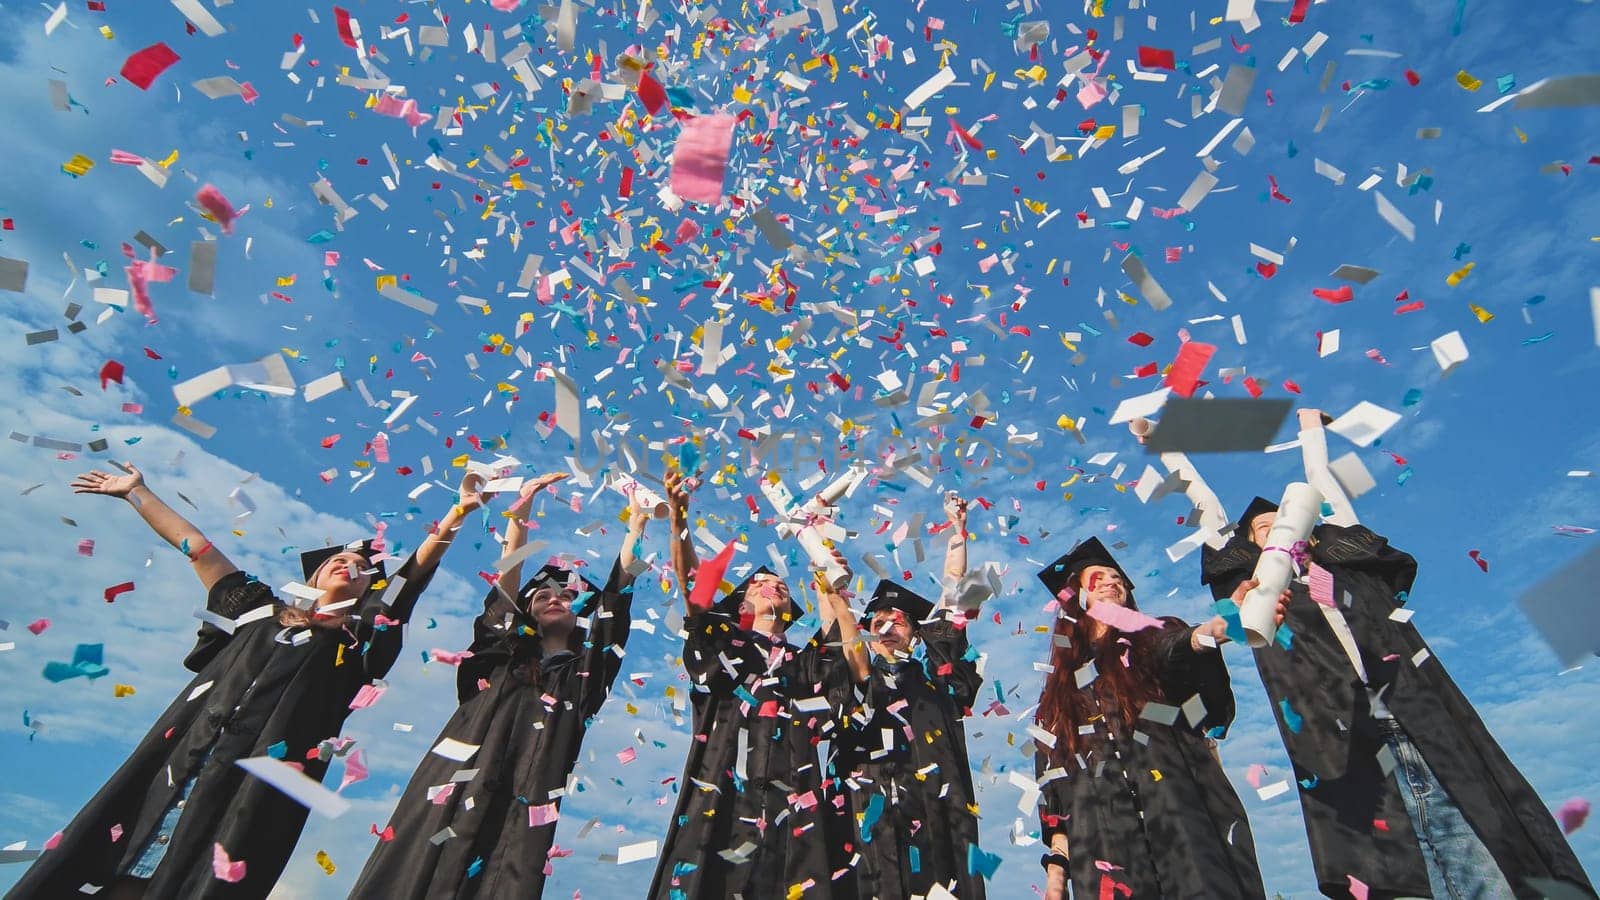 Happy graduates throw colorful confetti against a blue sky. by DovidPro